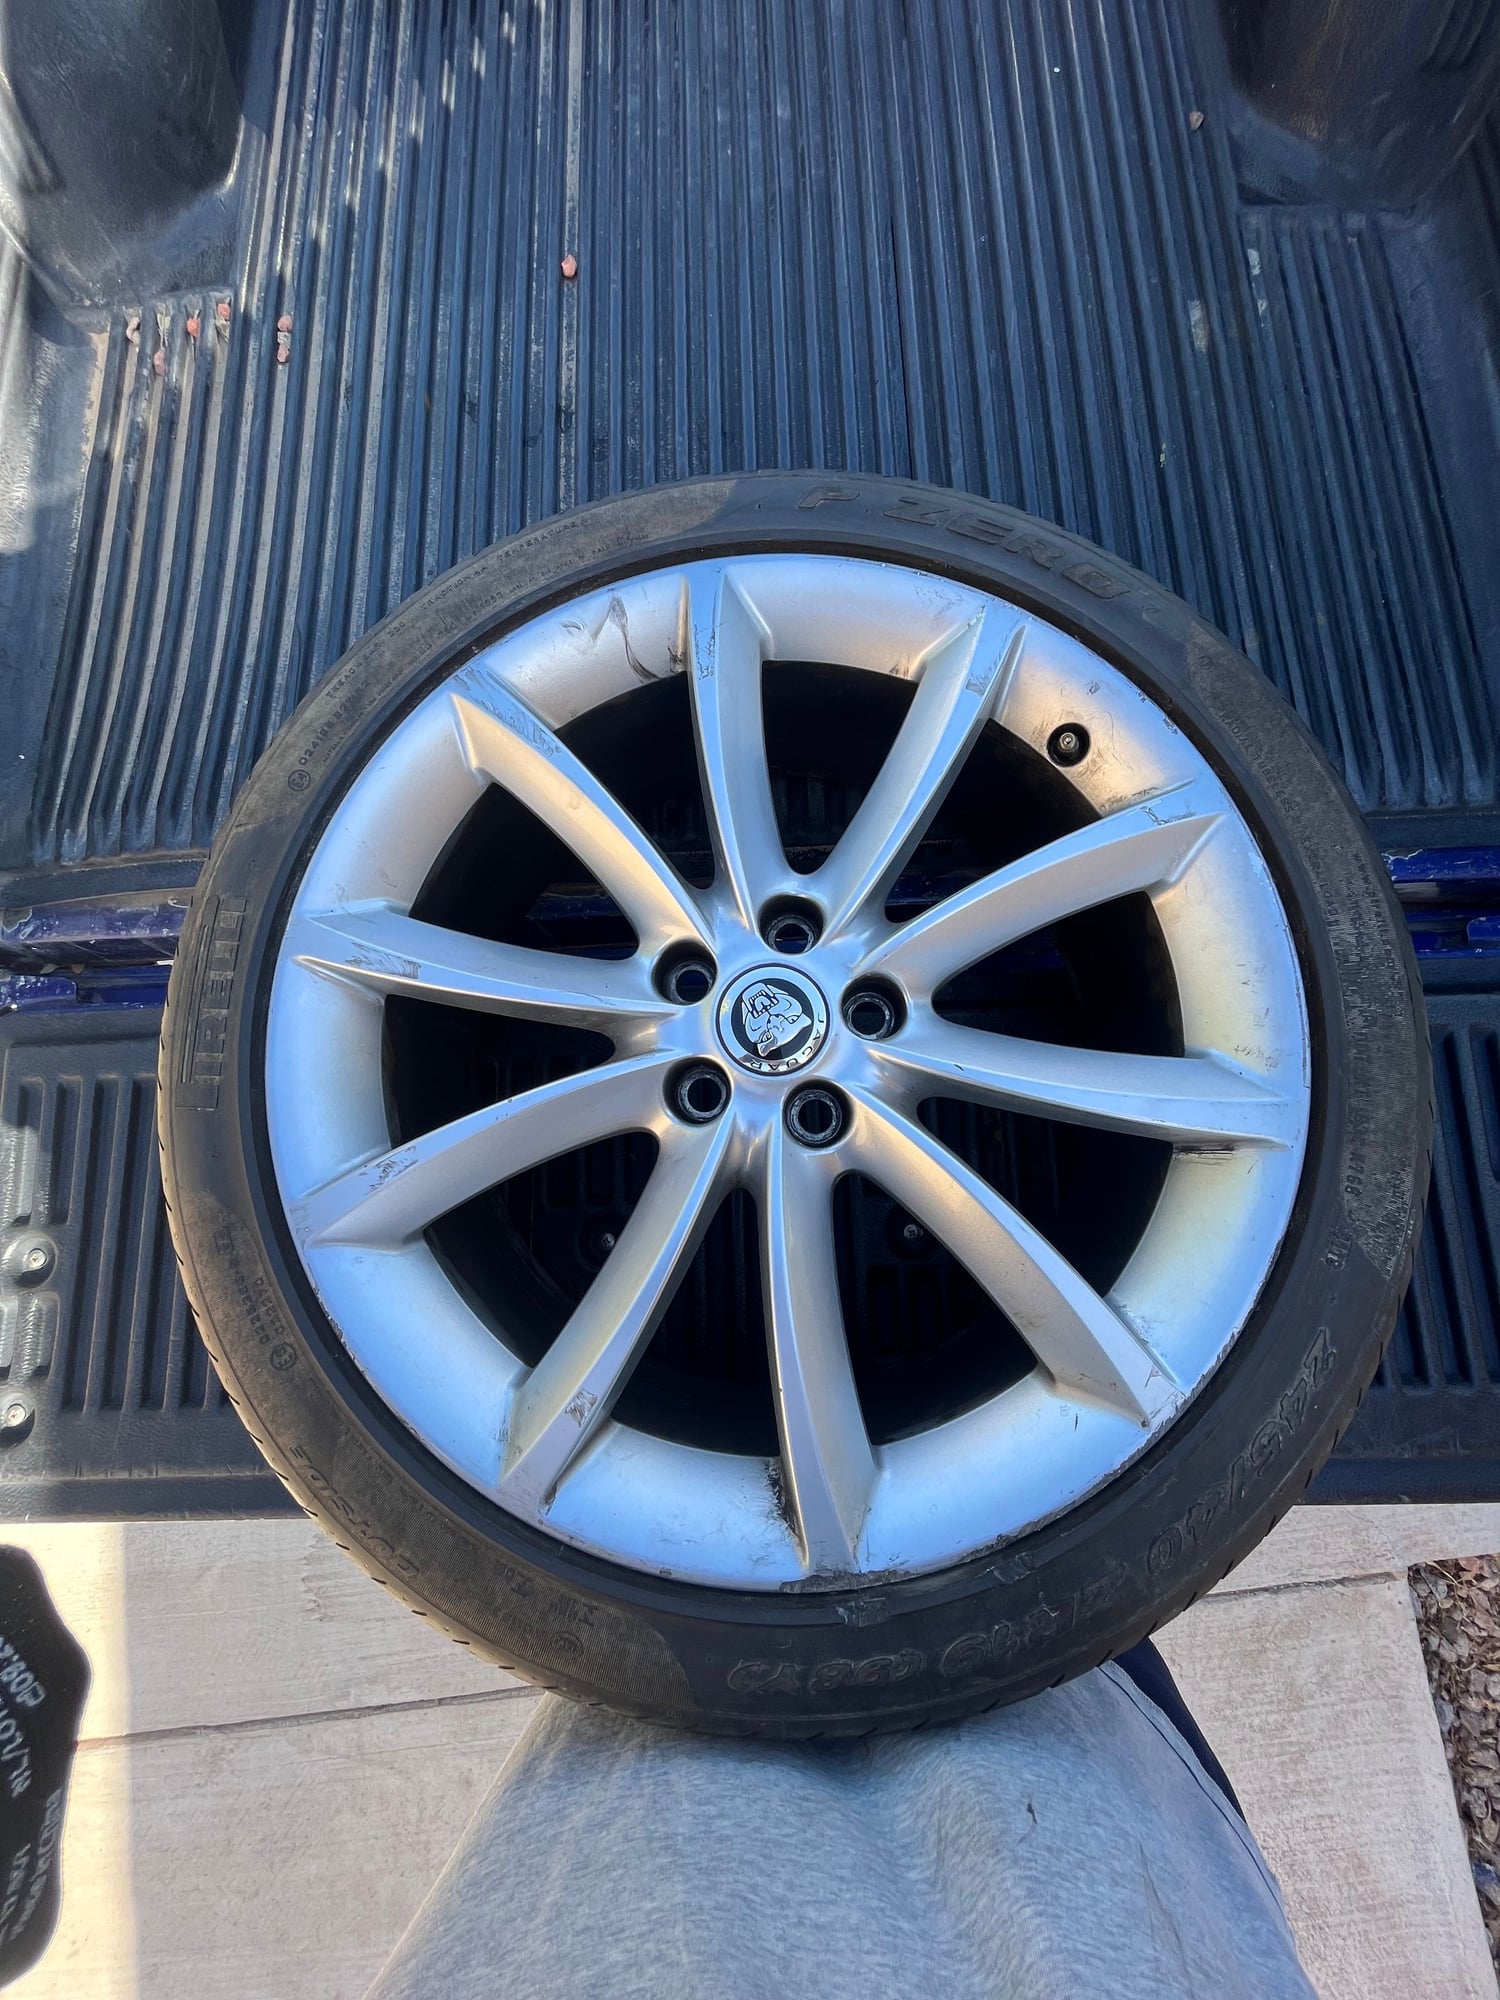 Wheels and Tires/Axles - F-type propeller wheel set 19” - Used - All Years Jaguar F-Type - Surprise, AZ 85379, United States